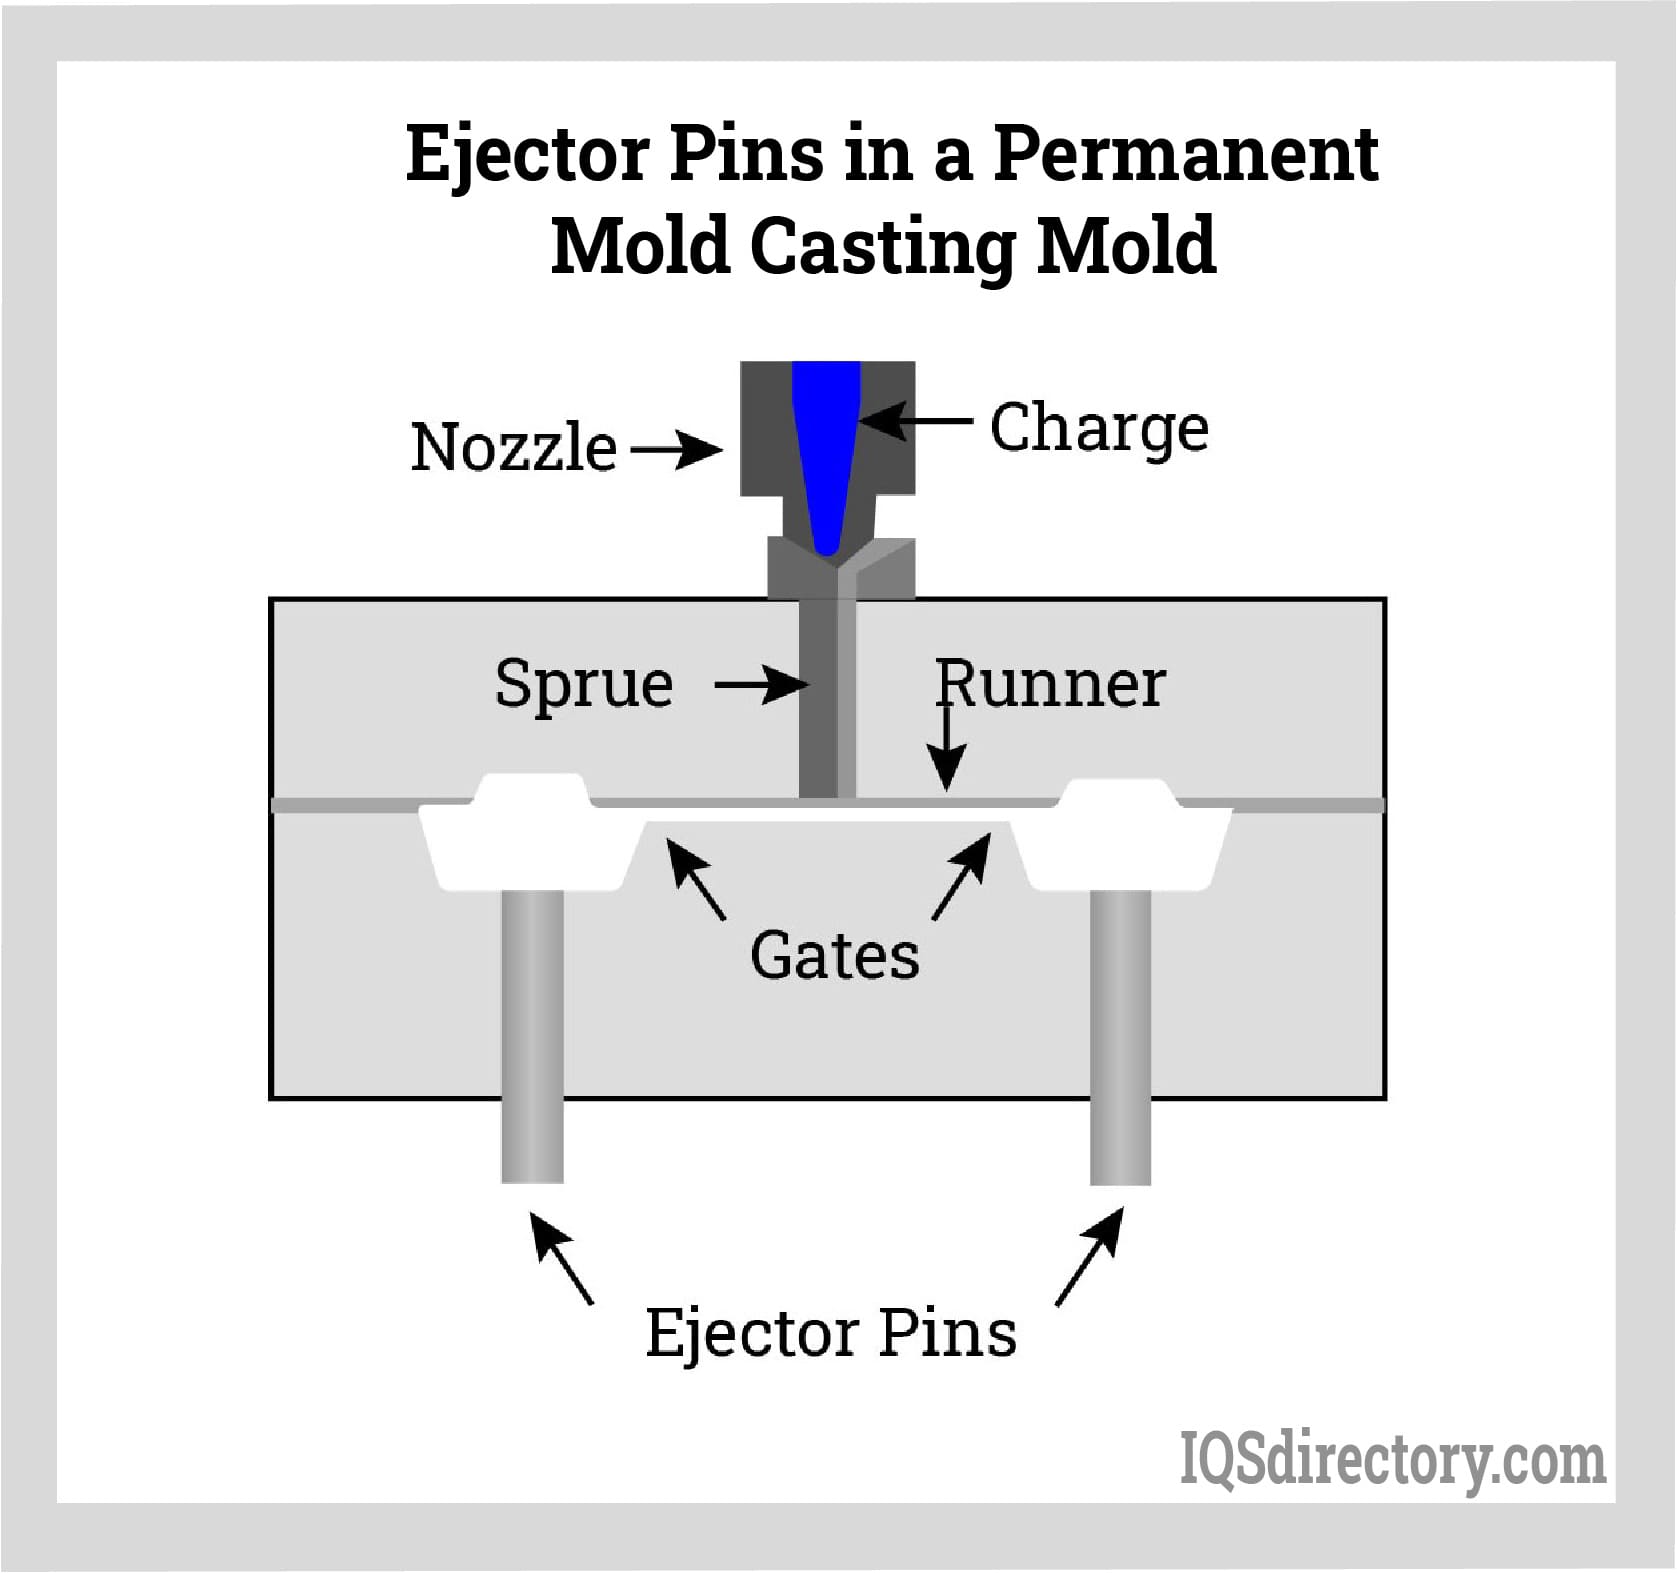 Ejector Pins in a Permanent Mold Casting Mold